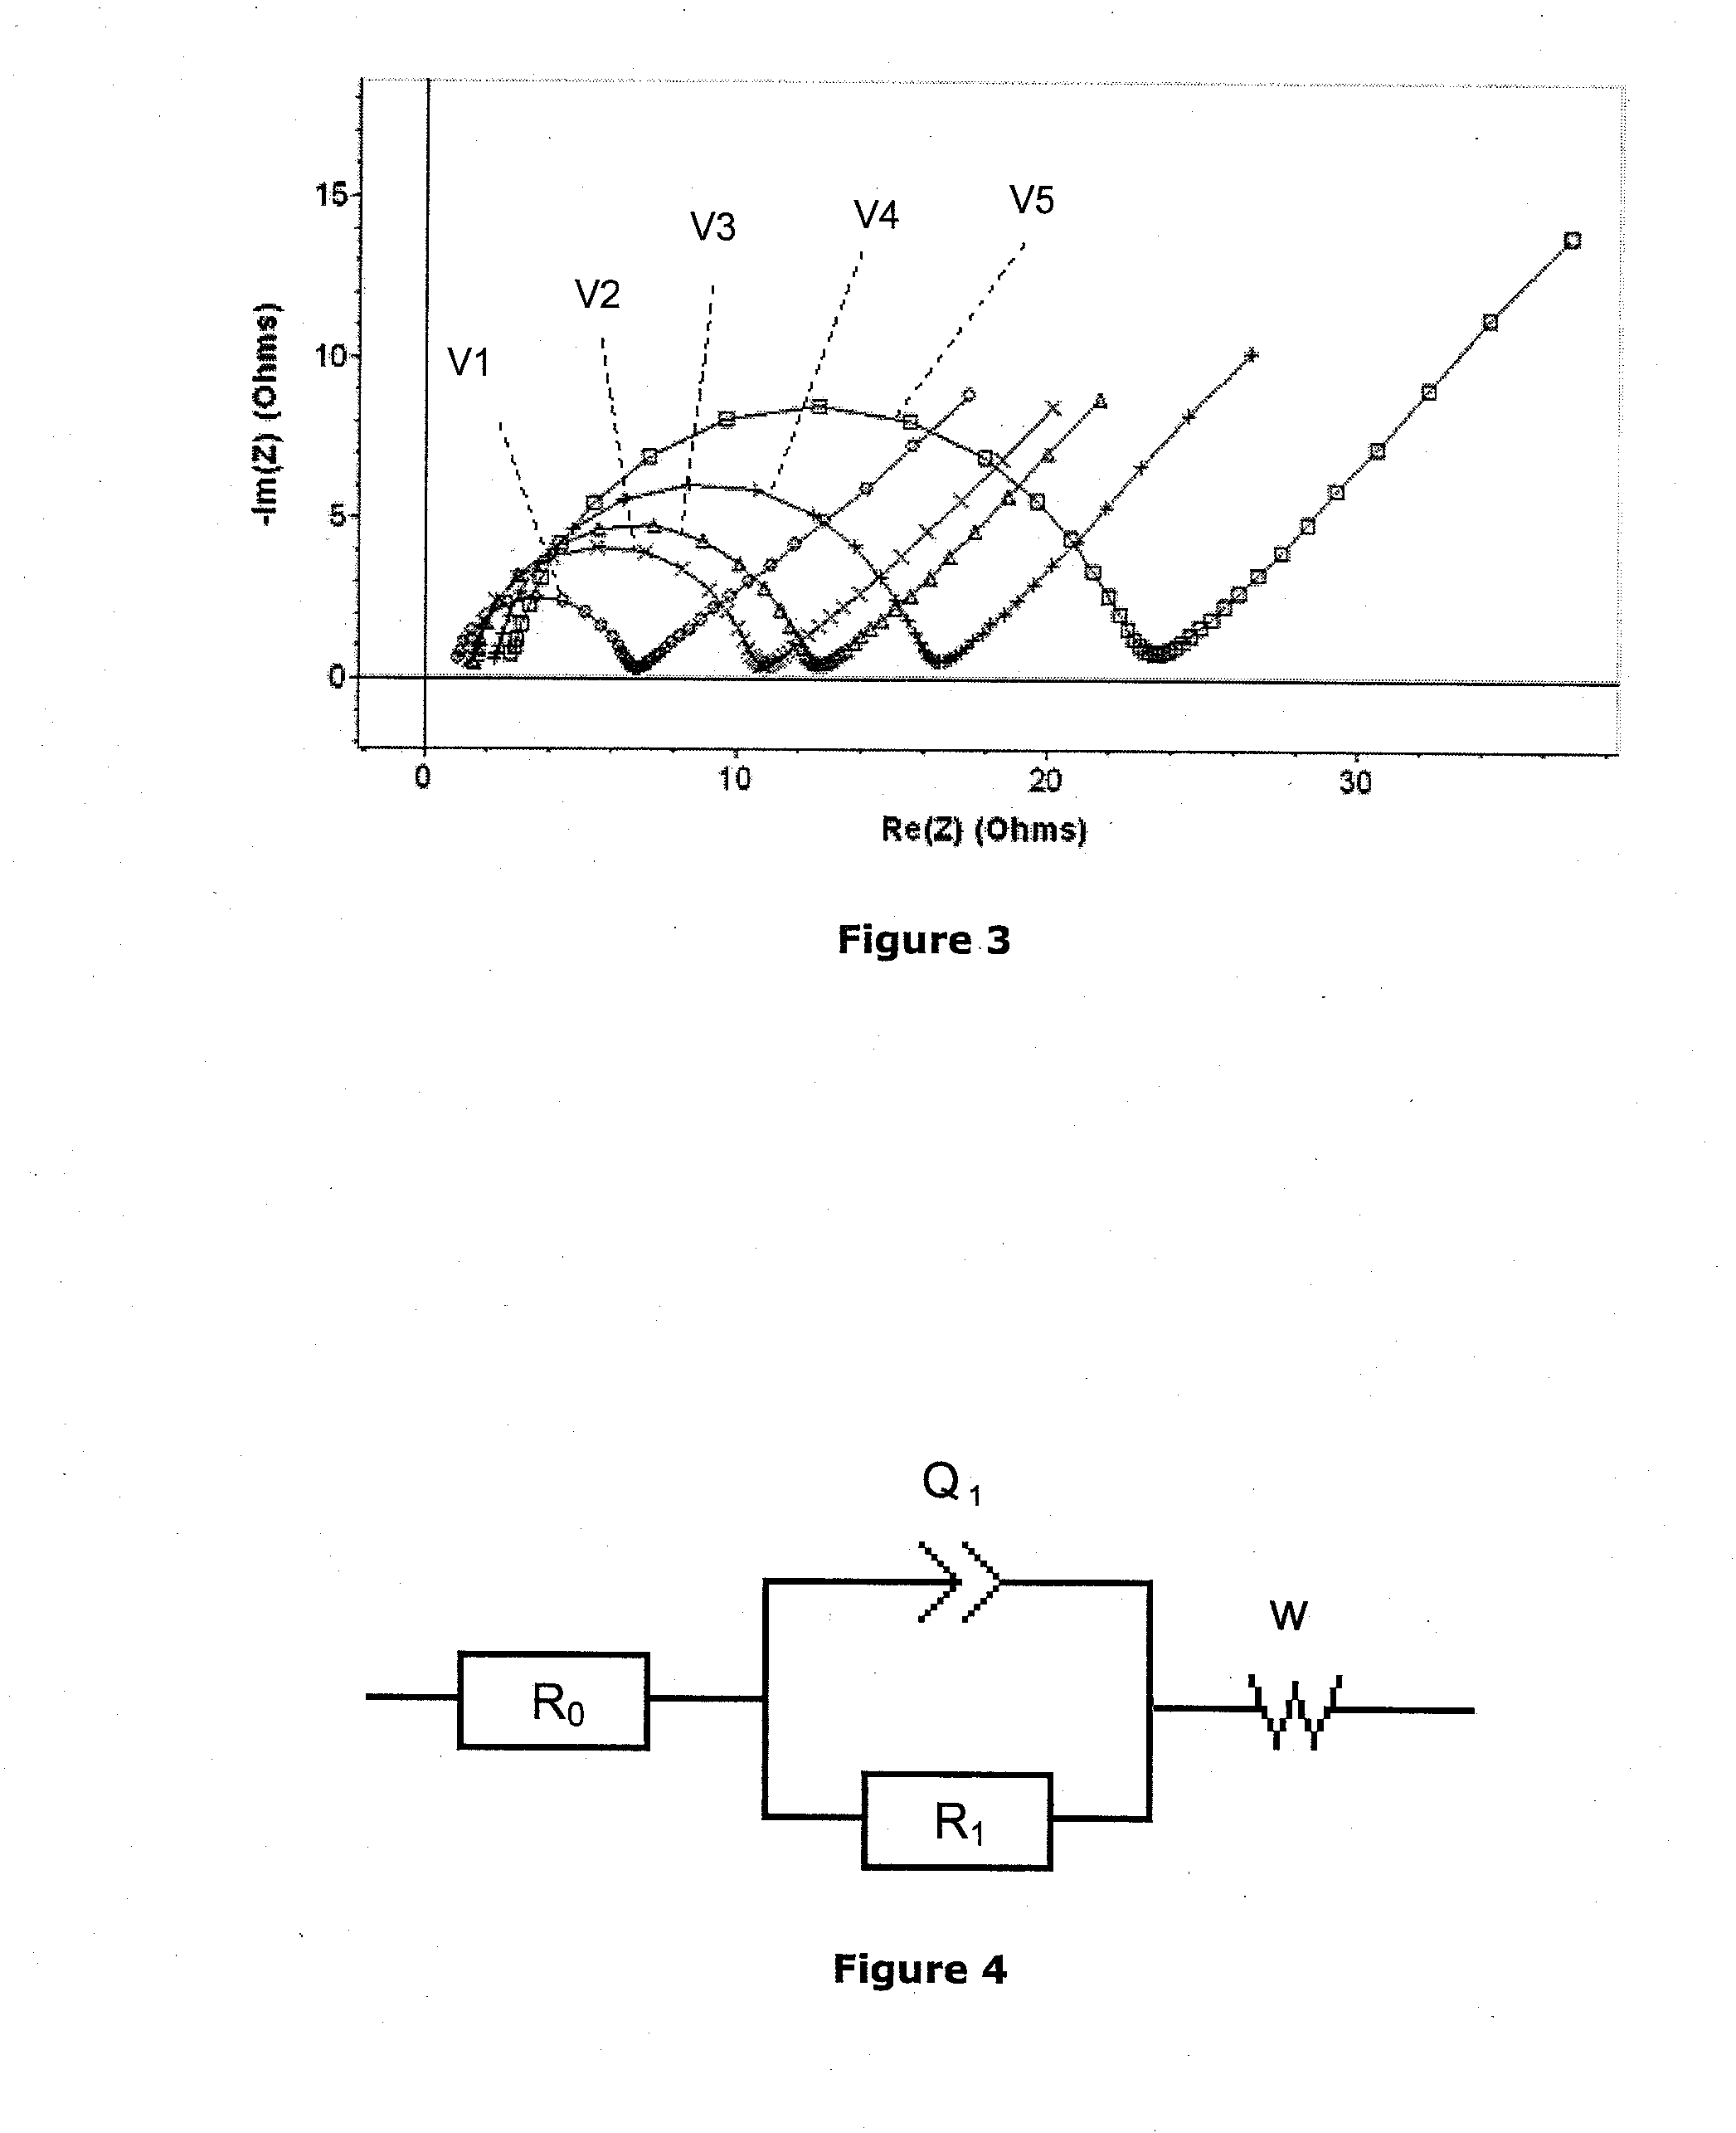 Method for in situ battery diagnostic by electrochemical impedance spectroscopy